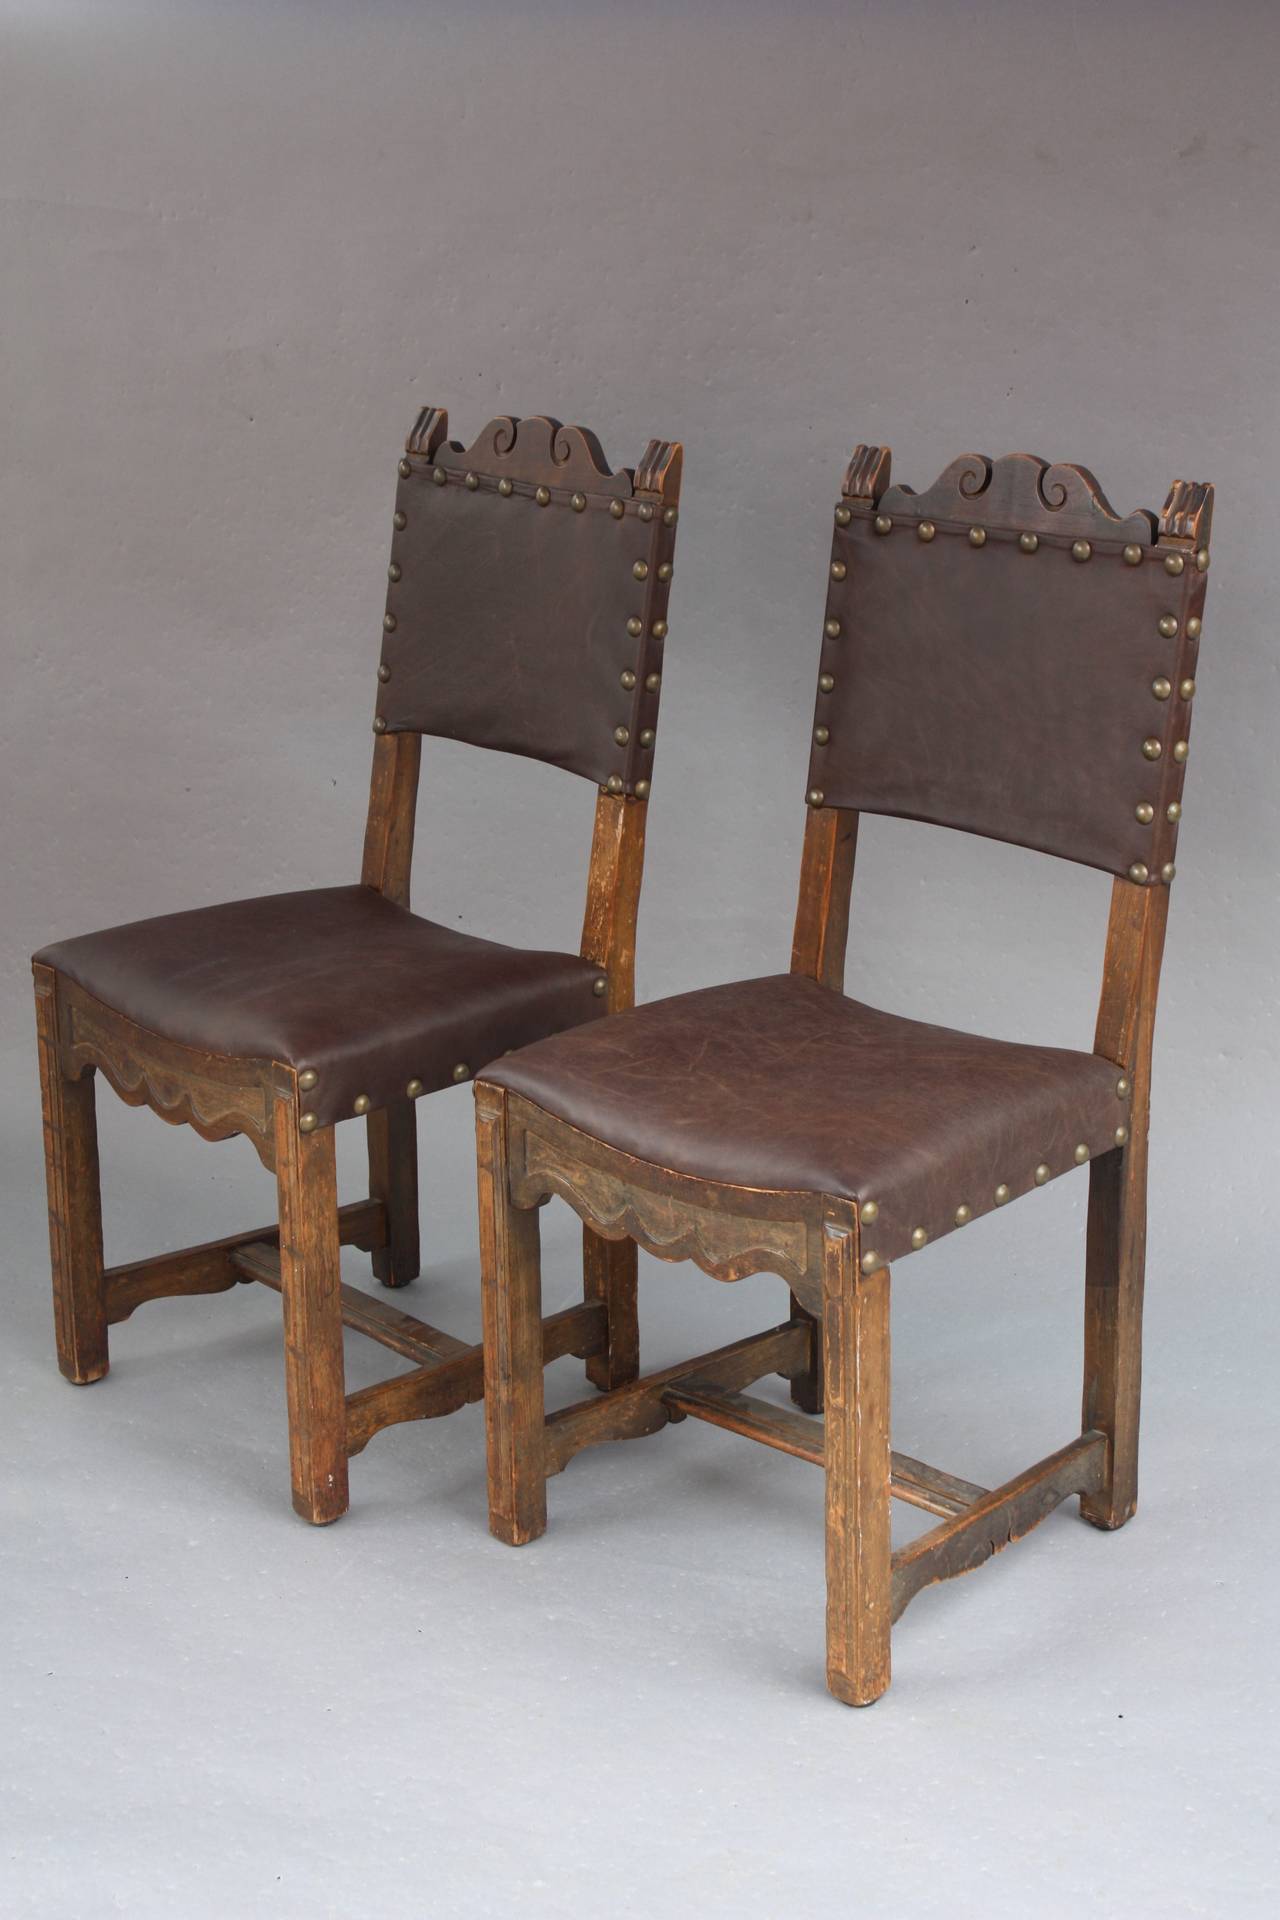 Circa 1920's side chairs with new leather upholstery. 40